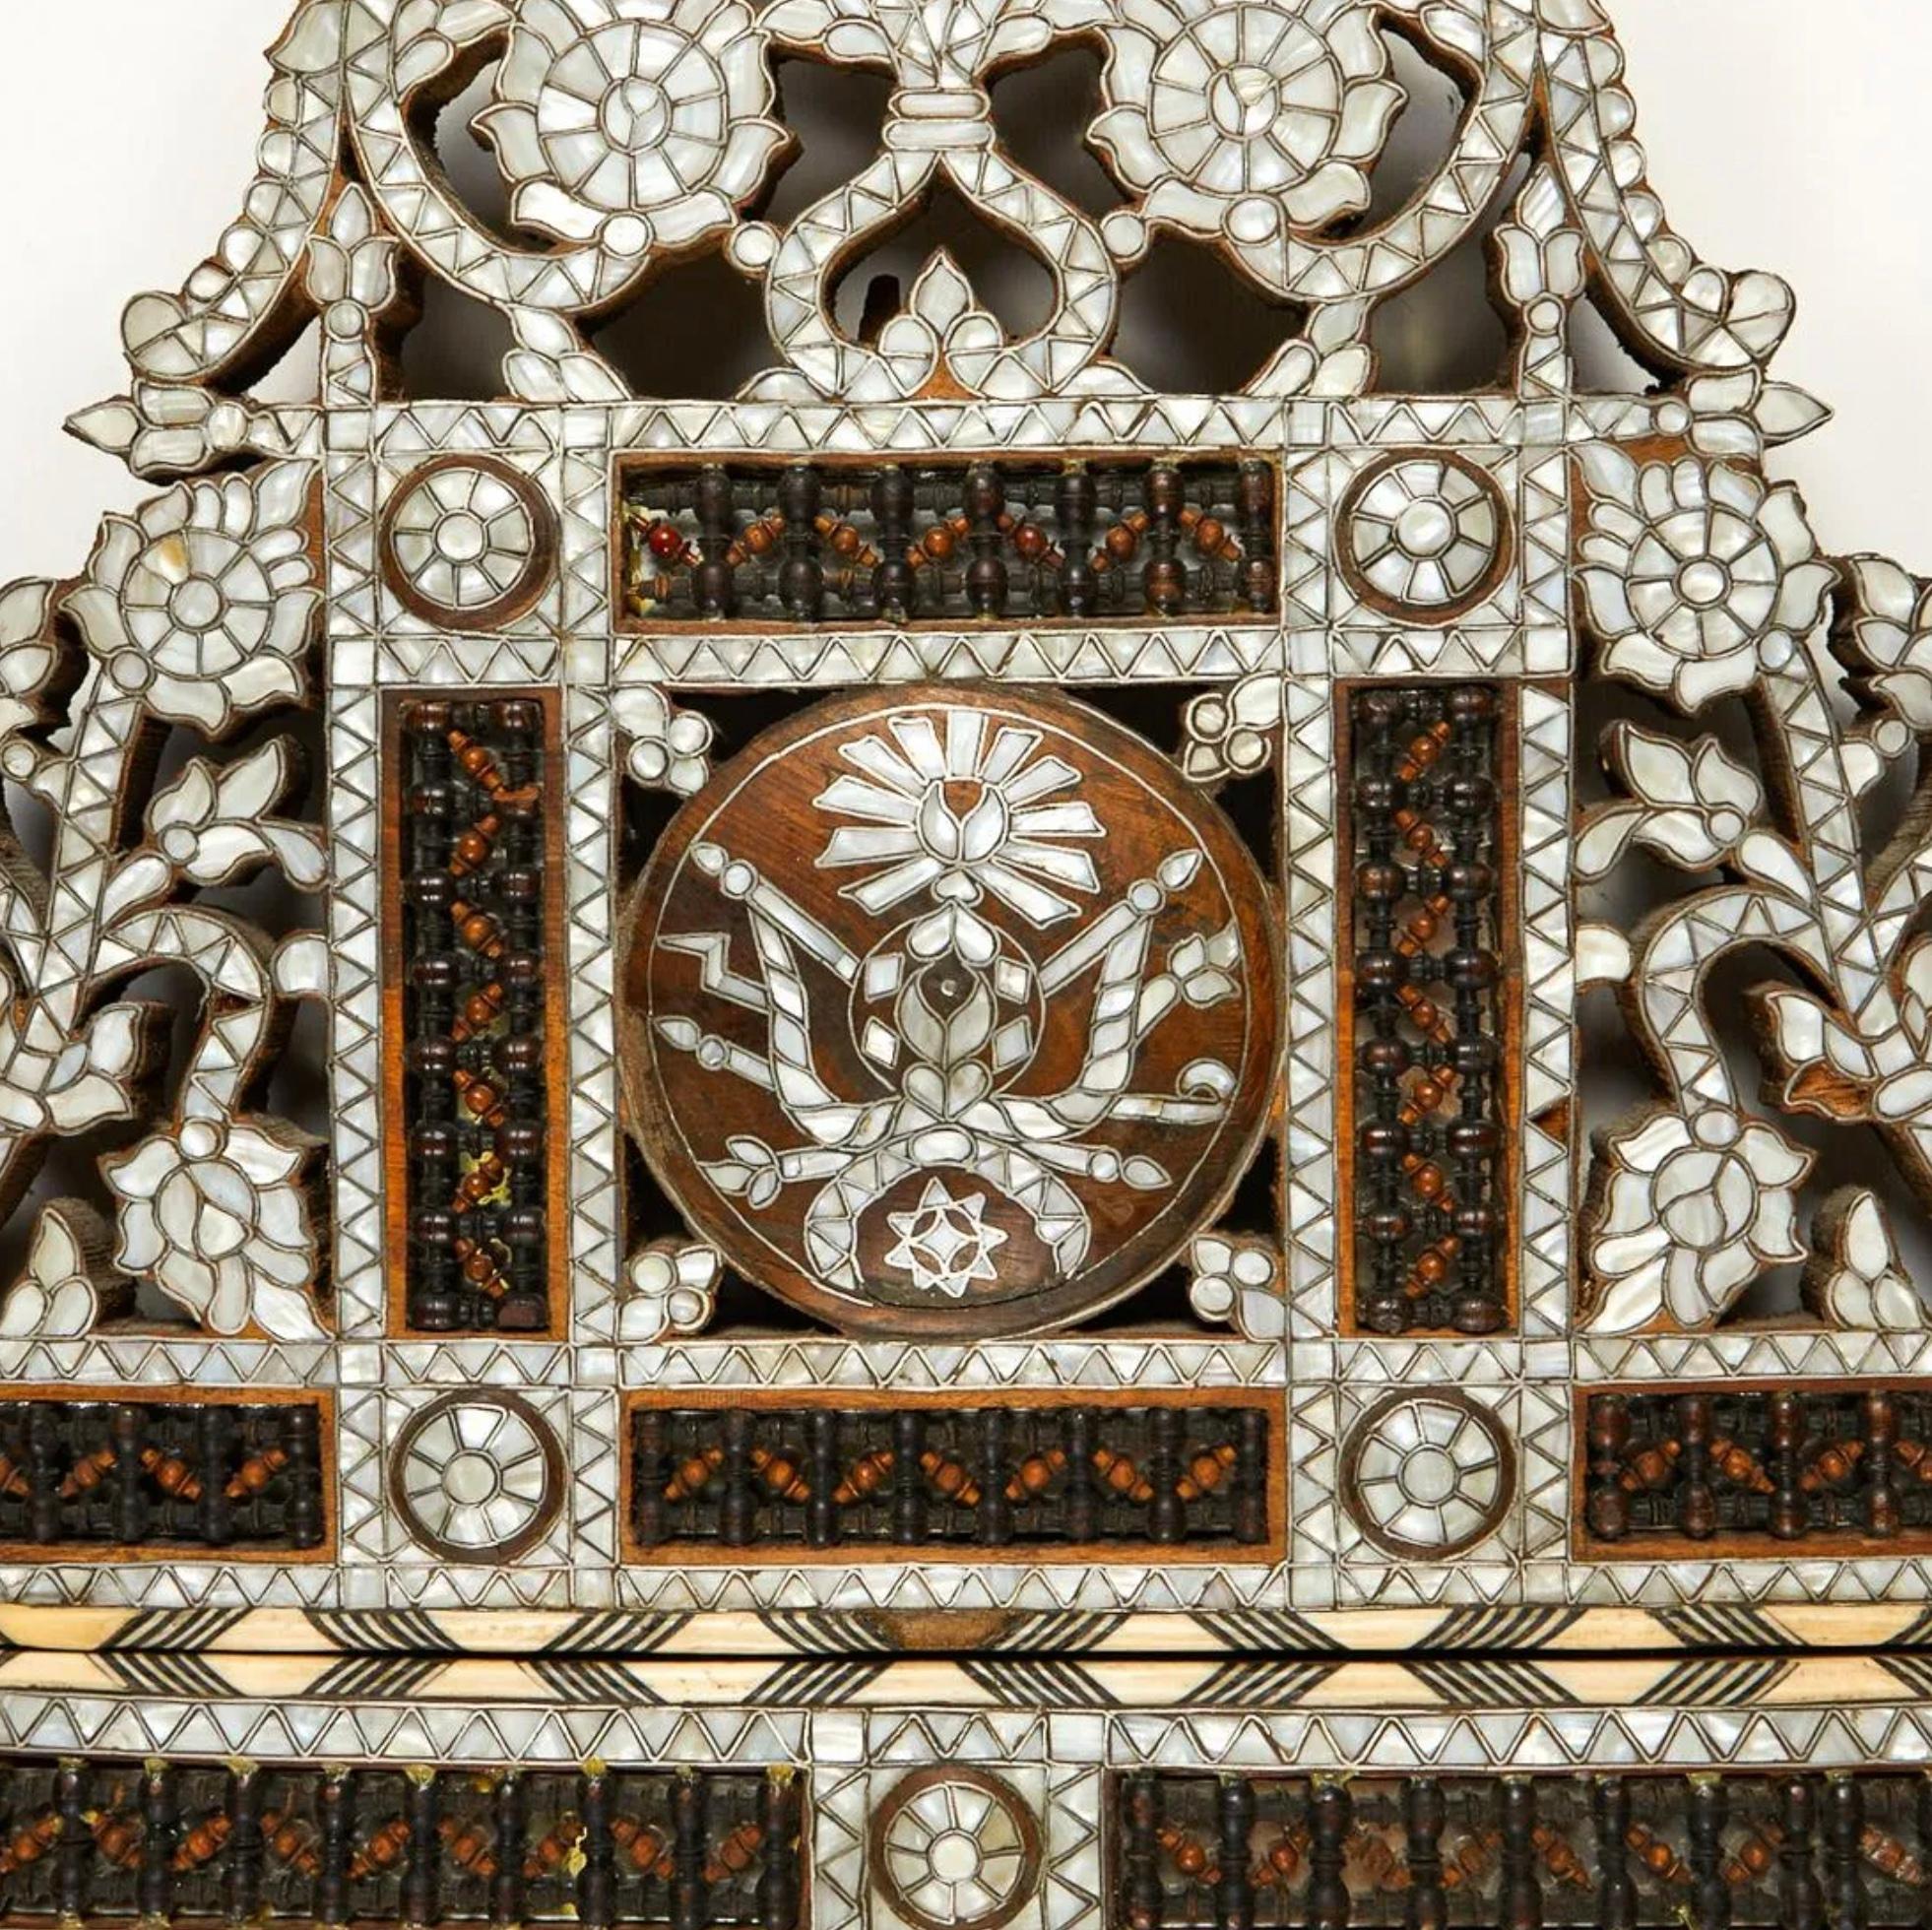 Large Syrian mother of pearl inlaid wooden mirror. The intricately carved wood is inlaid with geometric and floral designs in mother of pearl and shell with the intarsia method. With panels of mashrabiya style latticework throughout.

Provenance: